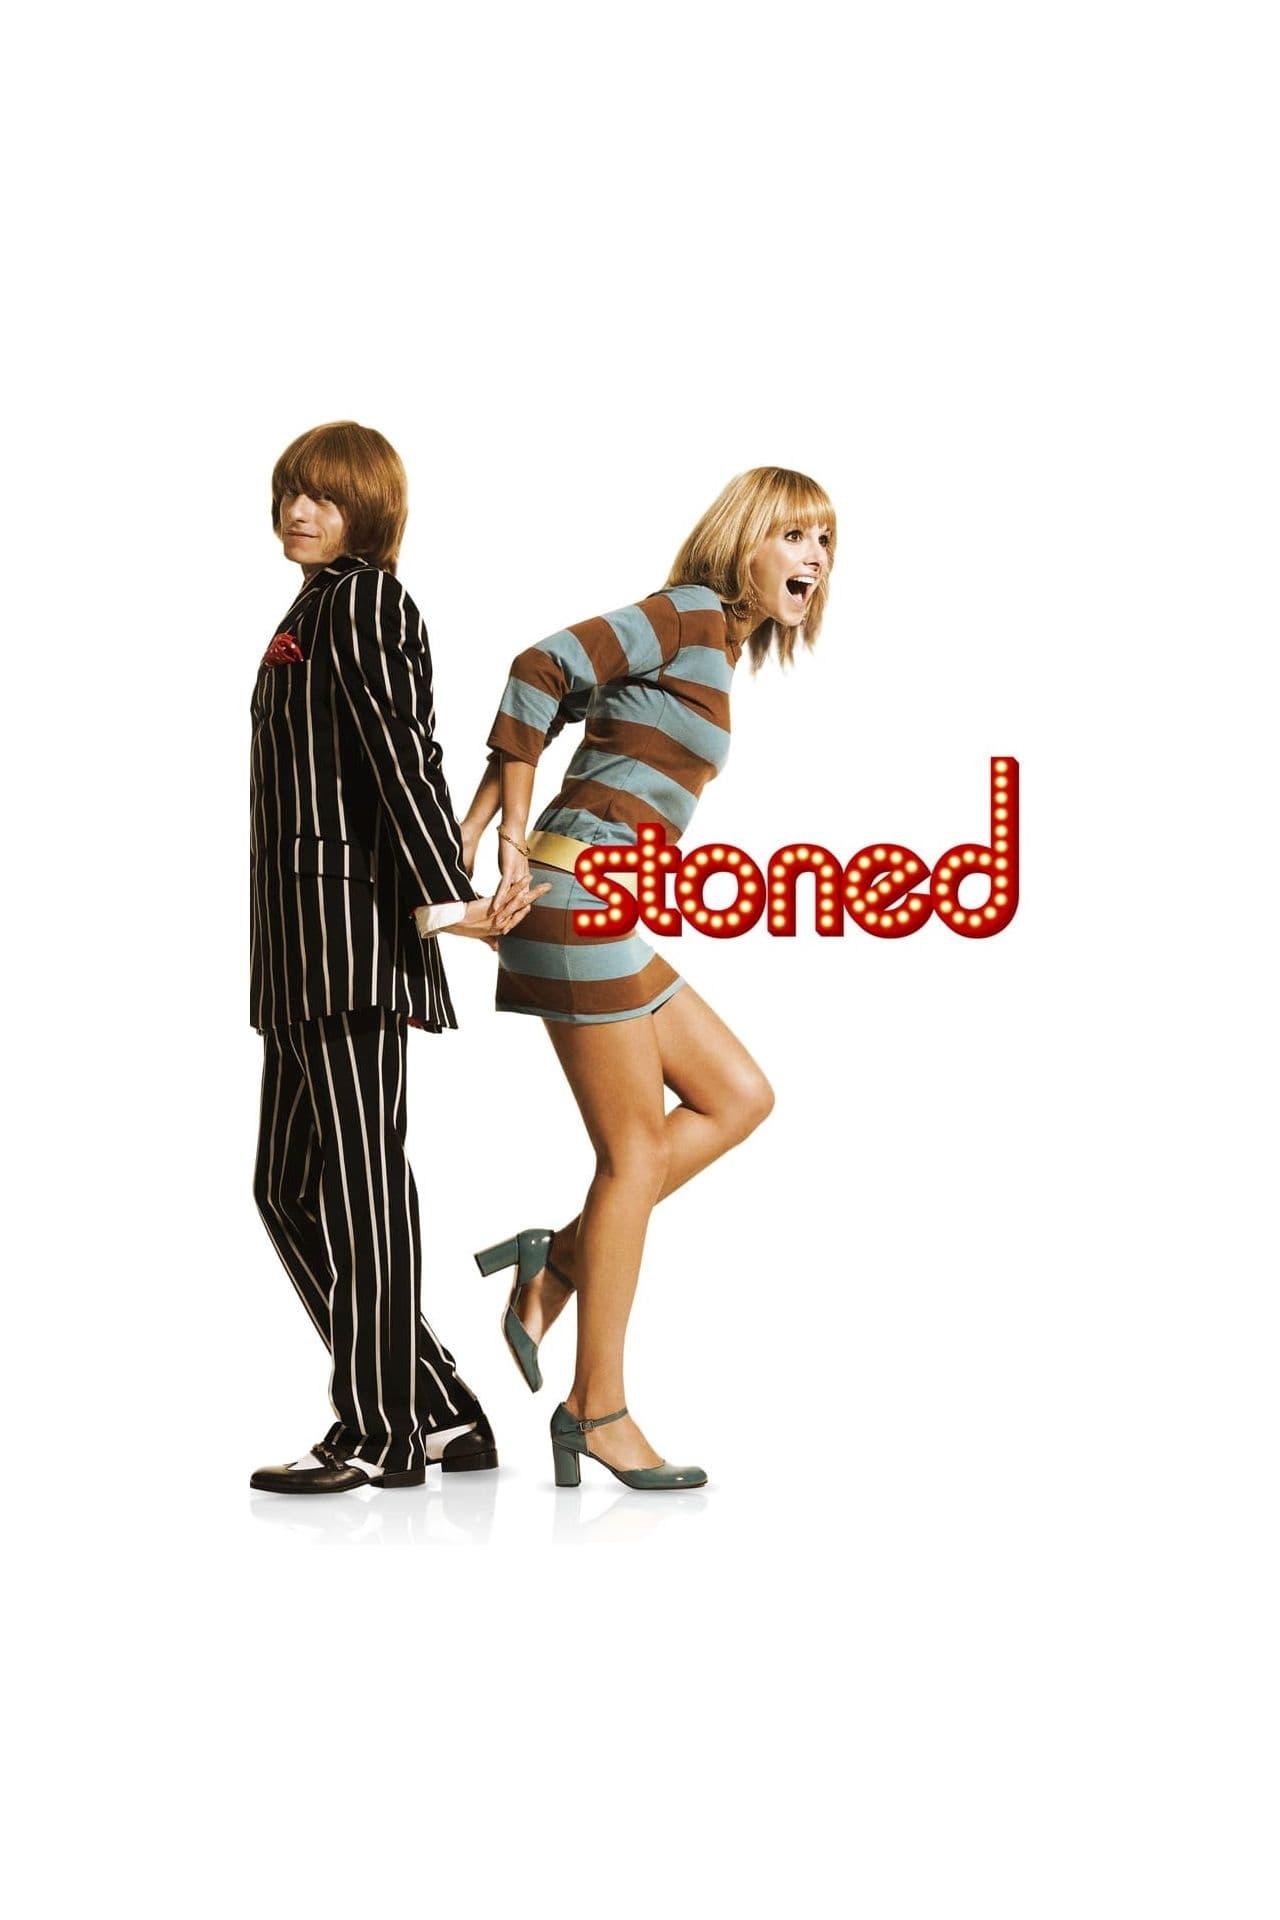 Stoned poster